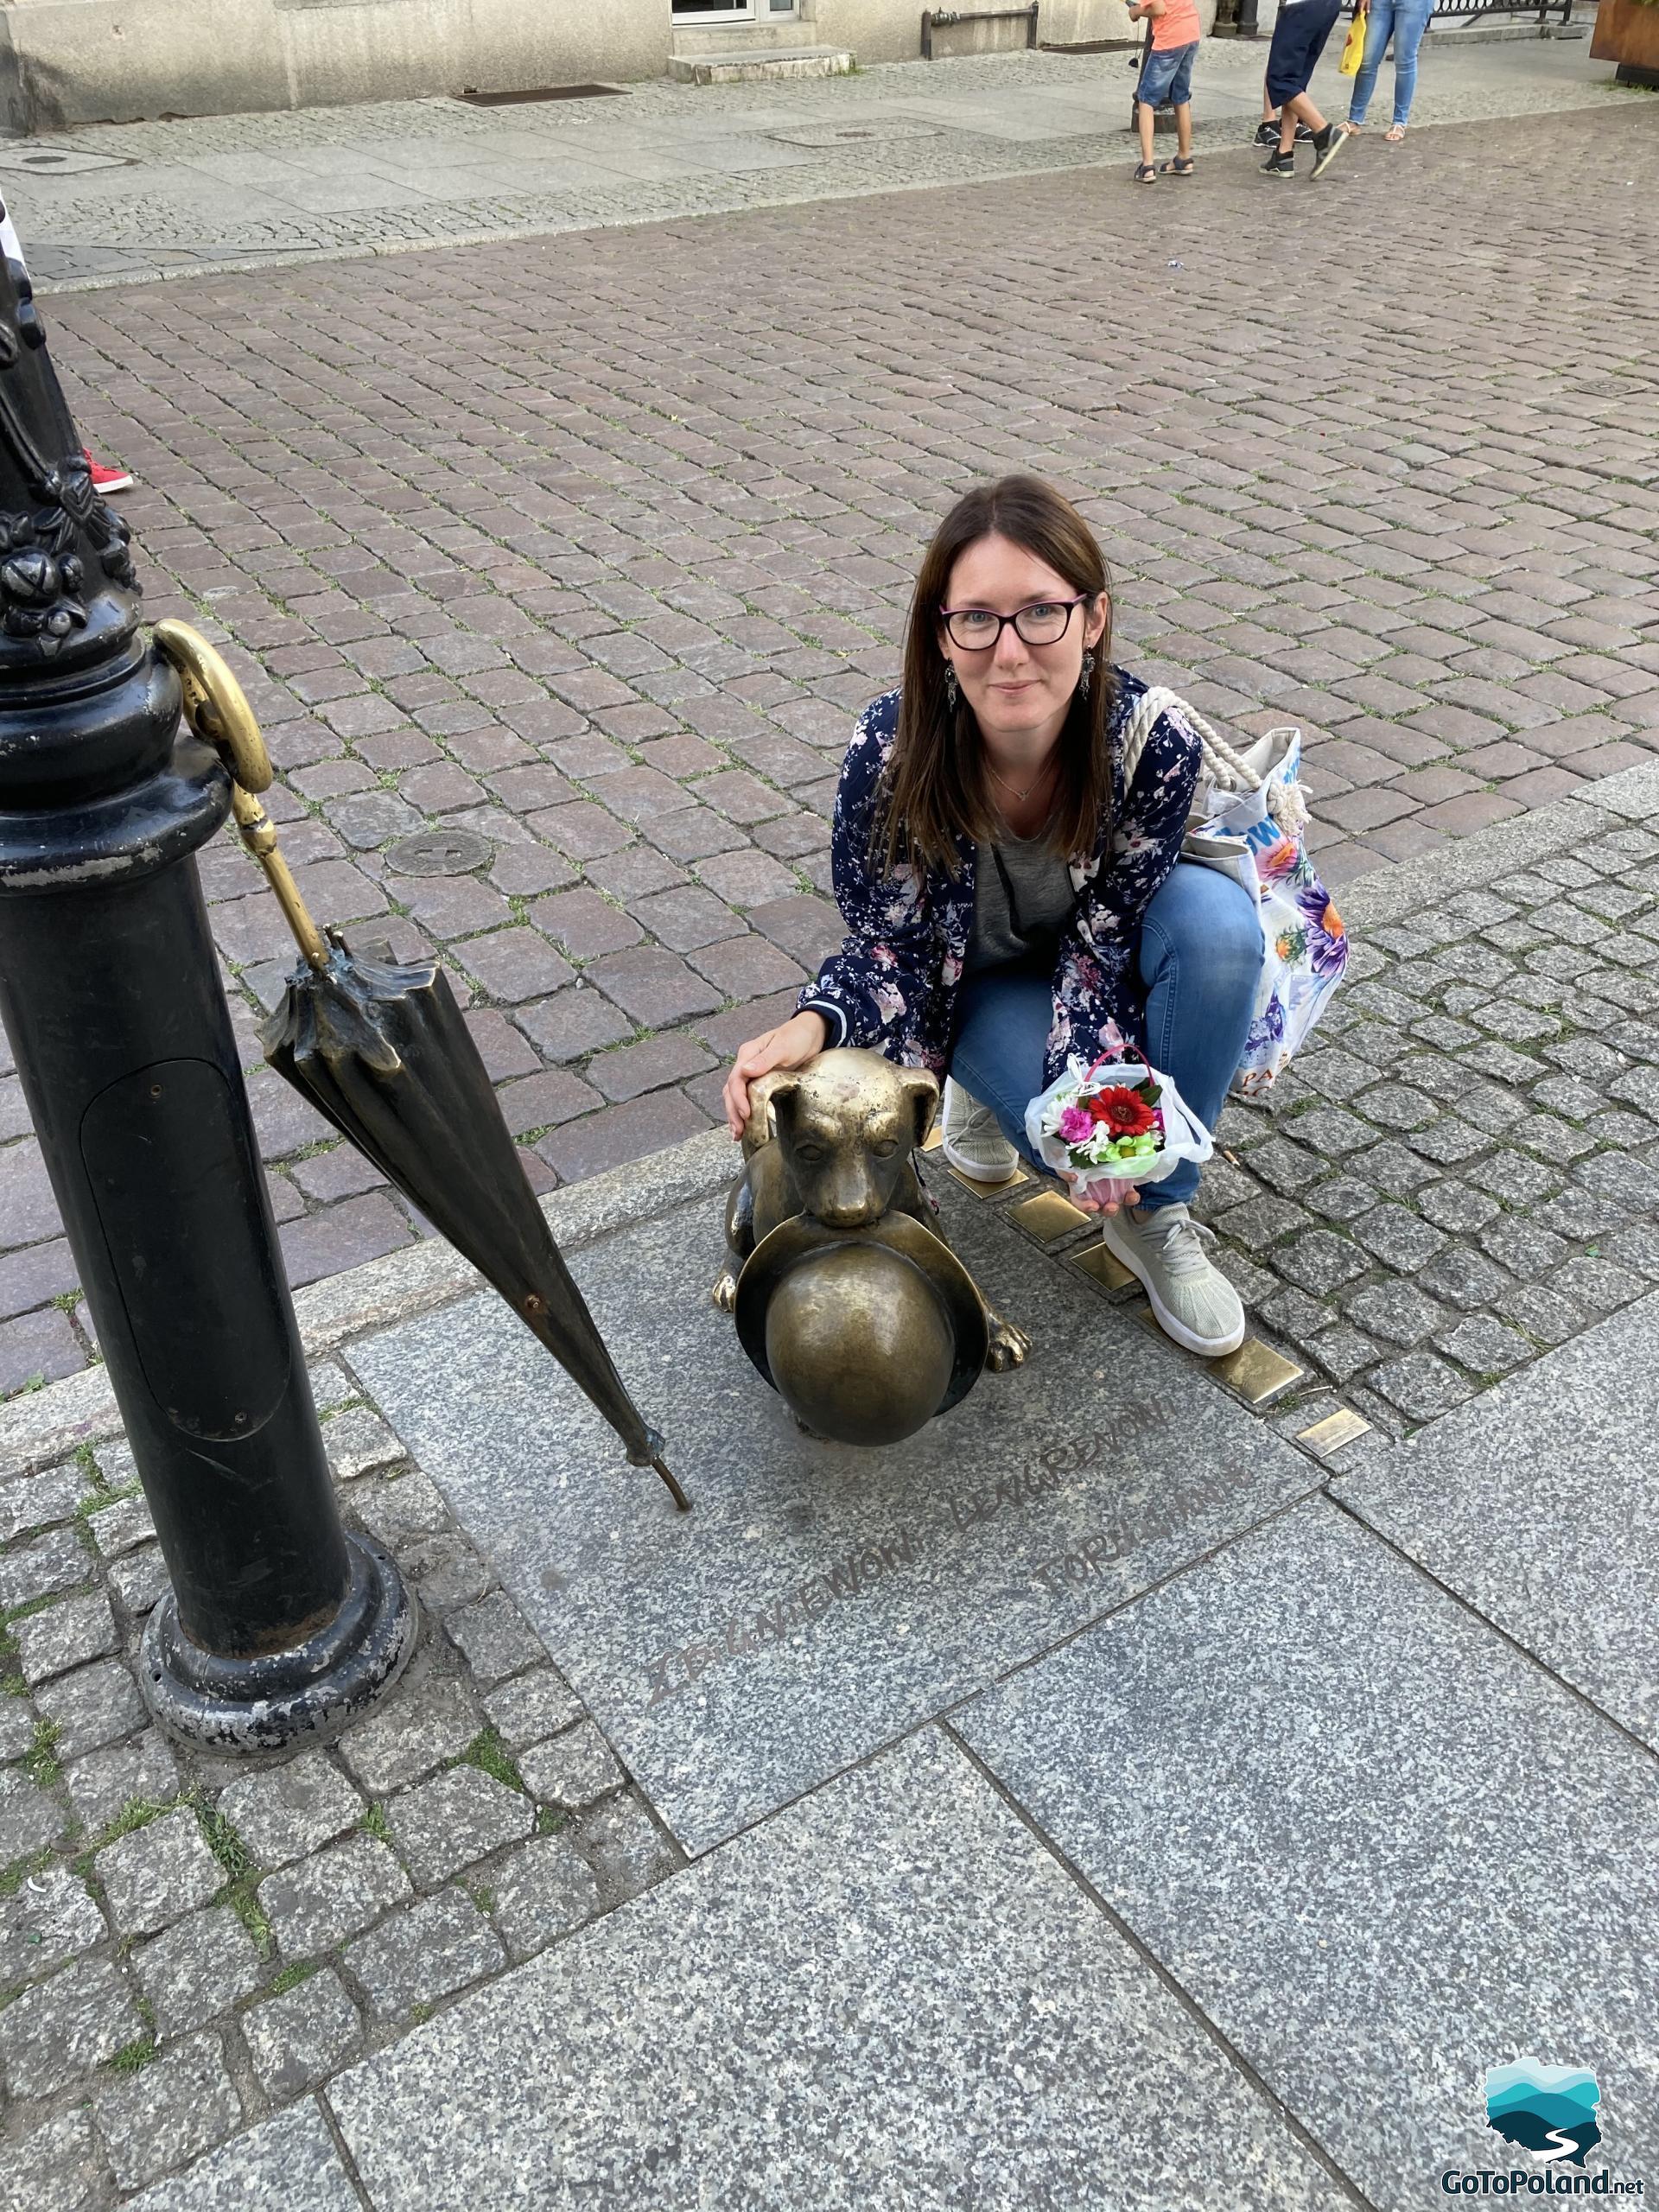 a woman is kneeling next to the dog statue, there is also un umbrella leaning on a street lamp